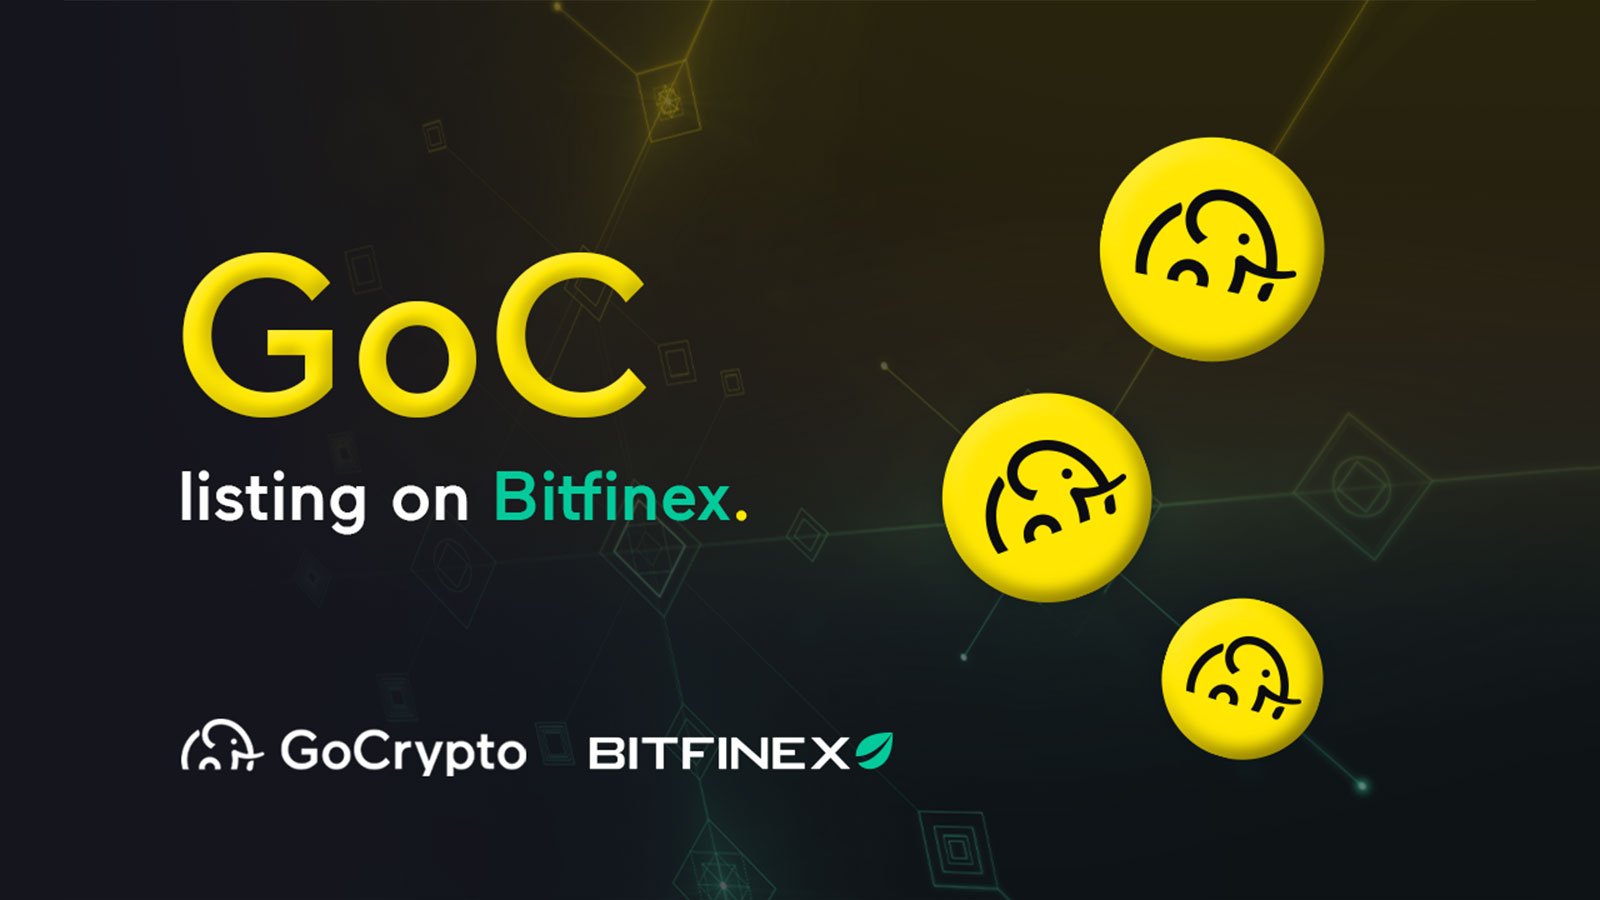 Bitfinex and GoCrypto Announce the Listing of the GoC Token 